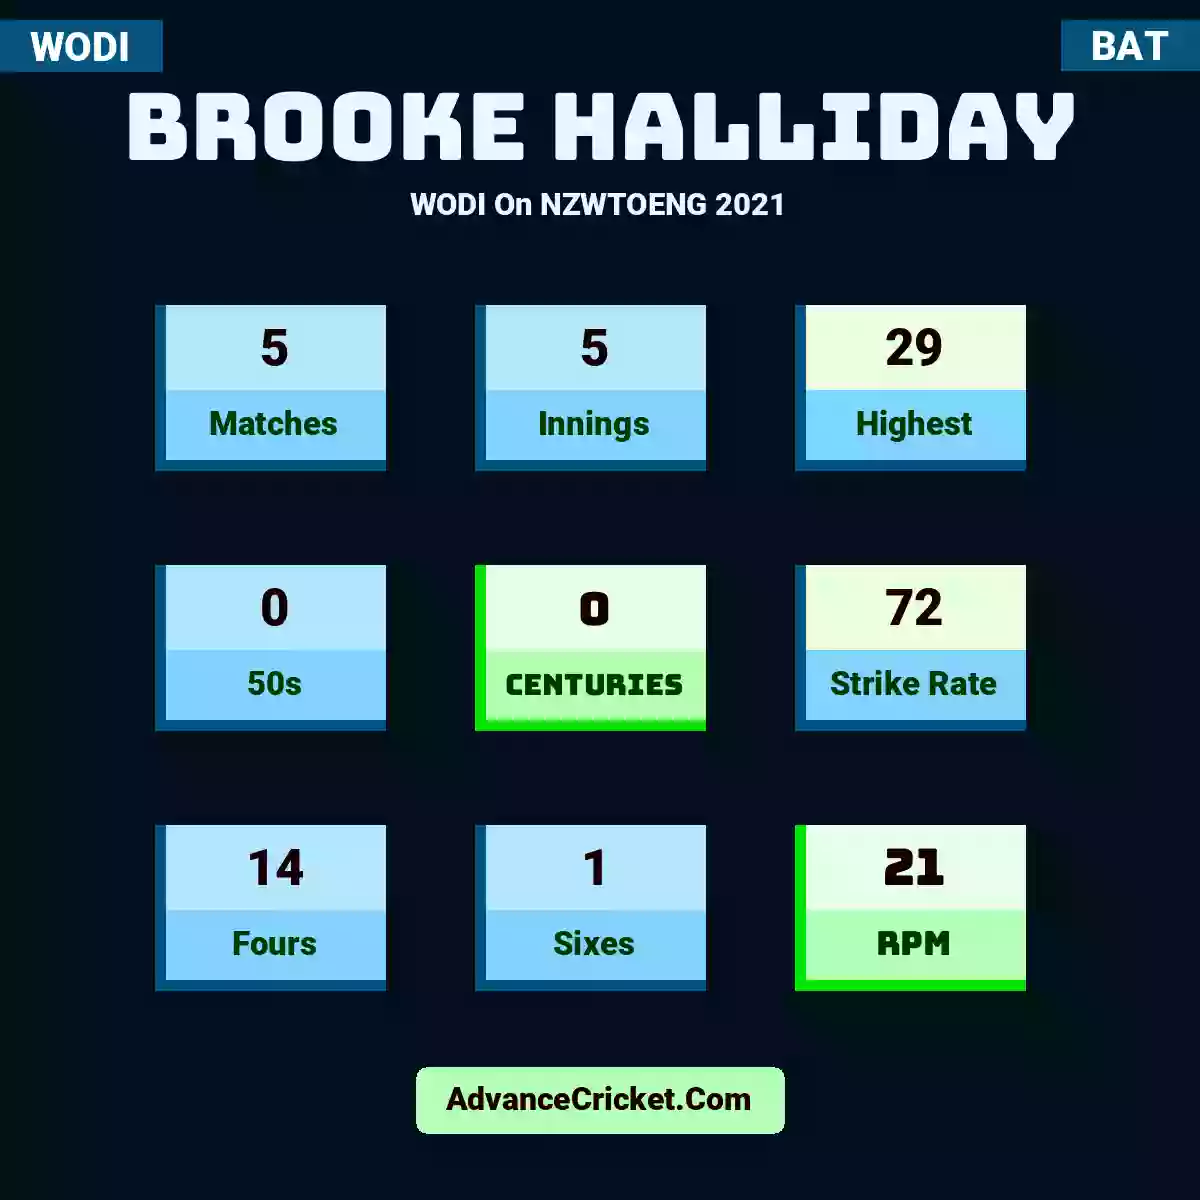 Brooke Halliday WODI  On NZWTOENG 2021, Brooke Halliday played 5 matches, scored 29 runs as highest, 0 half-centuries, and 0 centuries, with a strike rate of 72. B.Halliday hit 14 fours and 1 sixes, with an RPM of 21.